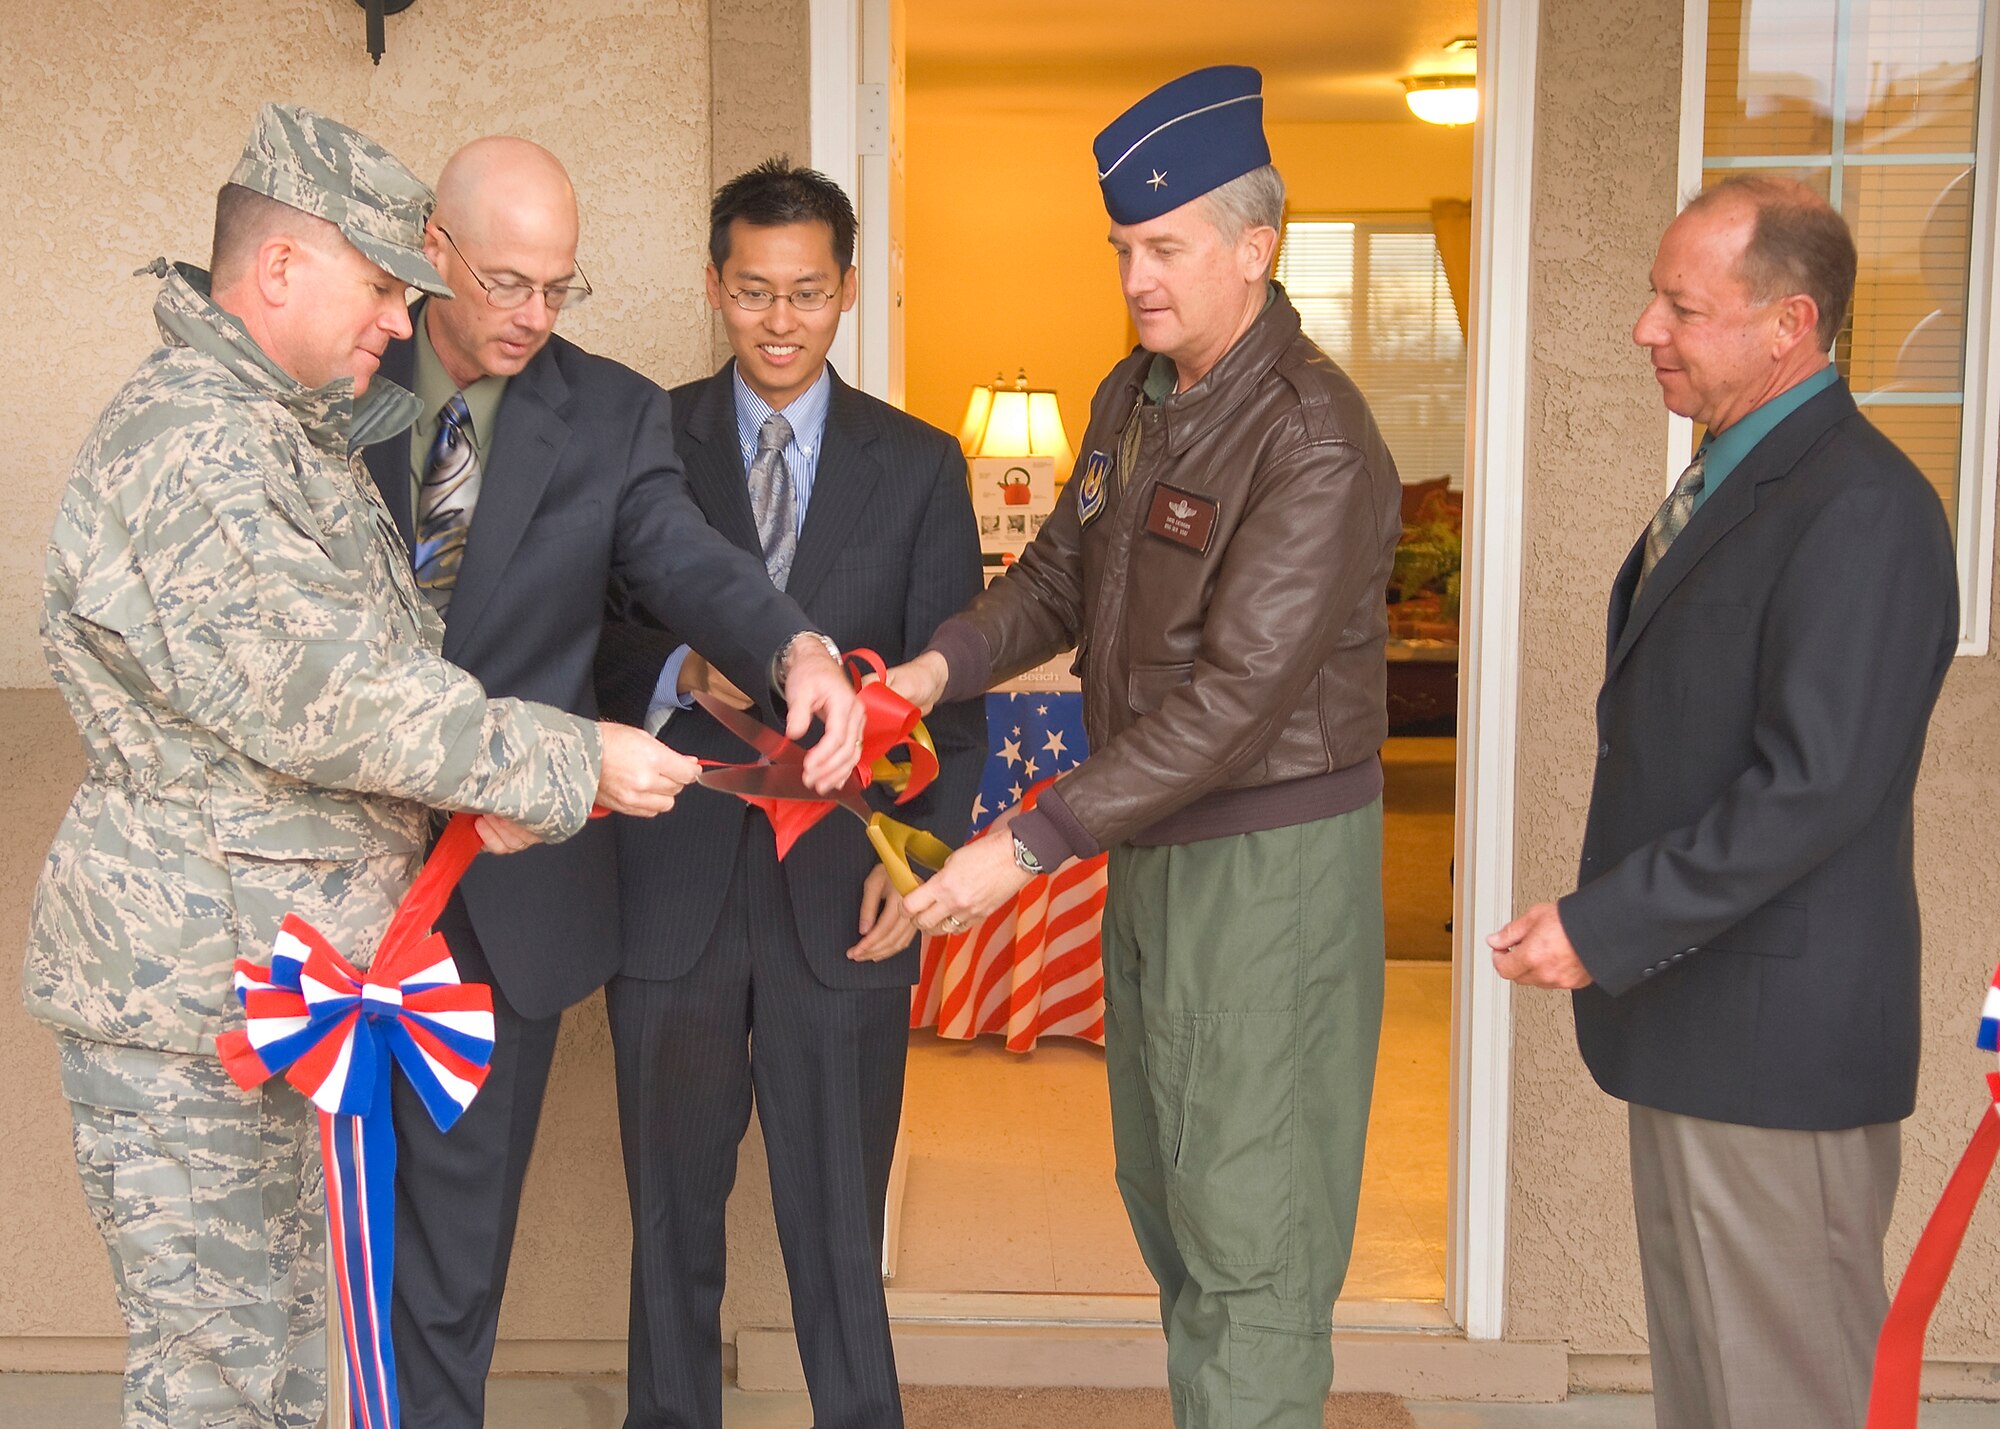 From left to right: Col. Bryan Gallagher, 95th Air Base Wing commander; James Judkins, director of the 95th Civil Engineer and Transportation Directorate; Vince Fong, representative for 22nd District U.S. Rep. Kevin McCarthy; Brig. Gen David Eichhorn, Air Force Flight Test Center commander and Joe Palko, Hunt Building Company project superintendent, cut the ribbon to open the Tamarisk Plains housing area here Jan. 22. Tamarisk Plains replaced 67 concrete houses built in 1949 with 60 modern homes for company grade officers. (Photo by Mike Cassidy)